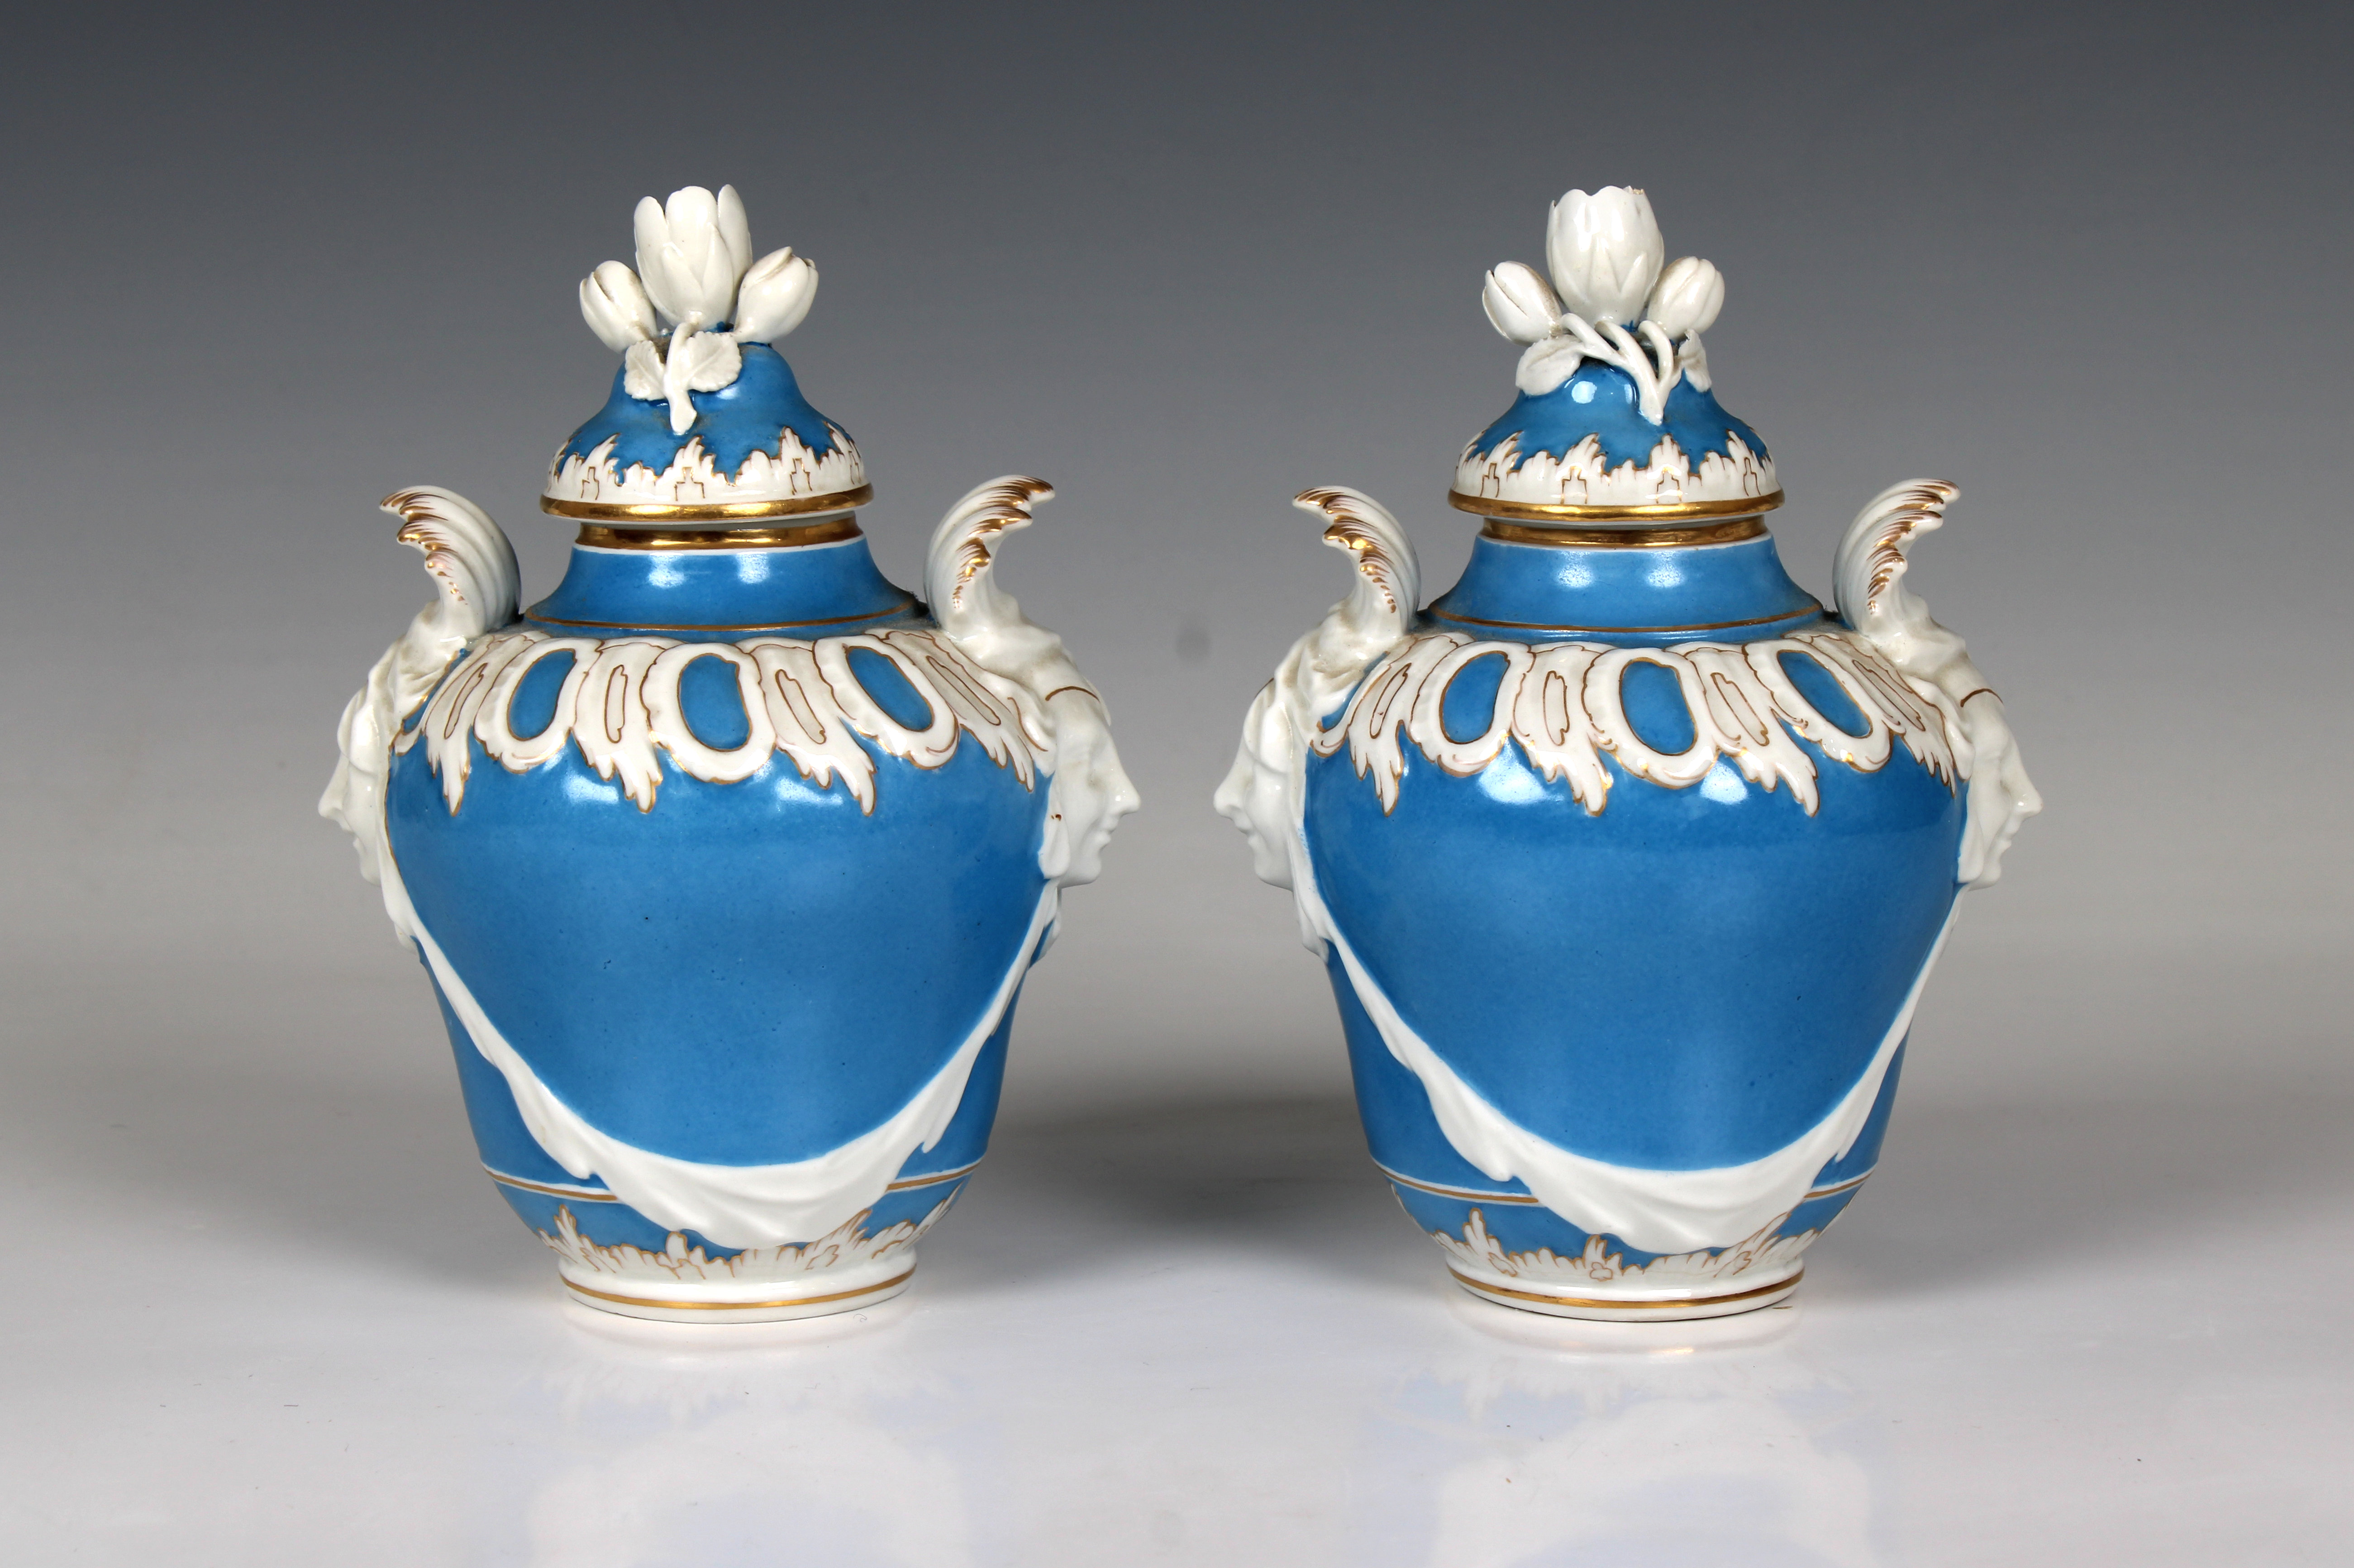 A pair of early 19th century Berlin KPM porcelain covered jars